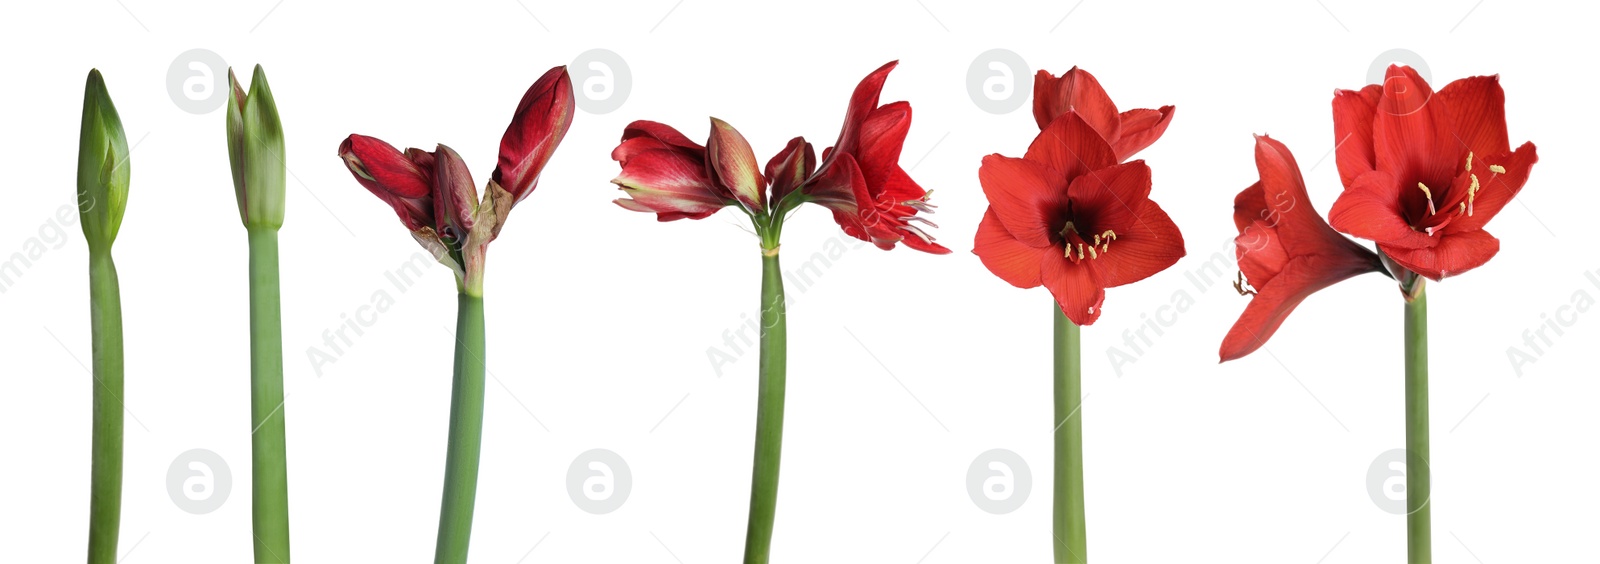 Image of Beautiful red Amaryllis (Hippeastrum) flowers on white background, collage. Banner design